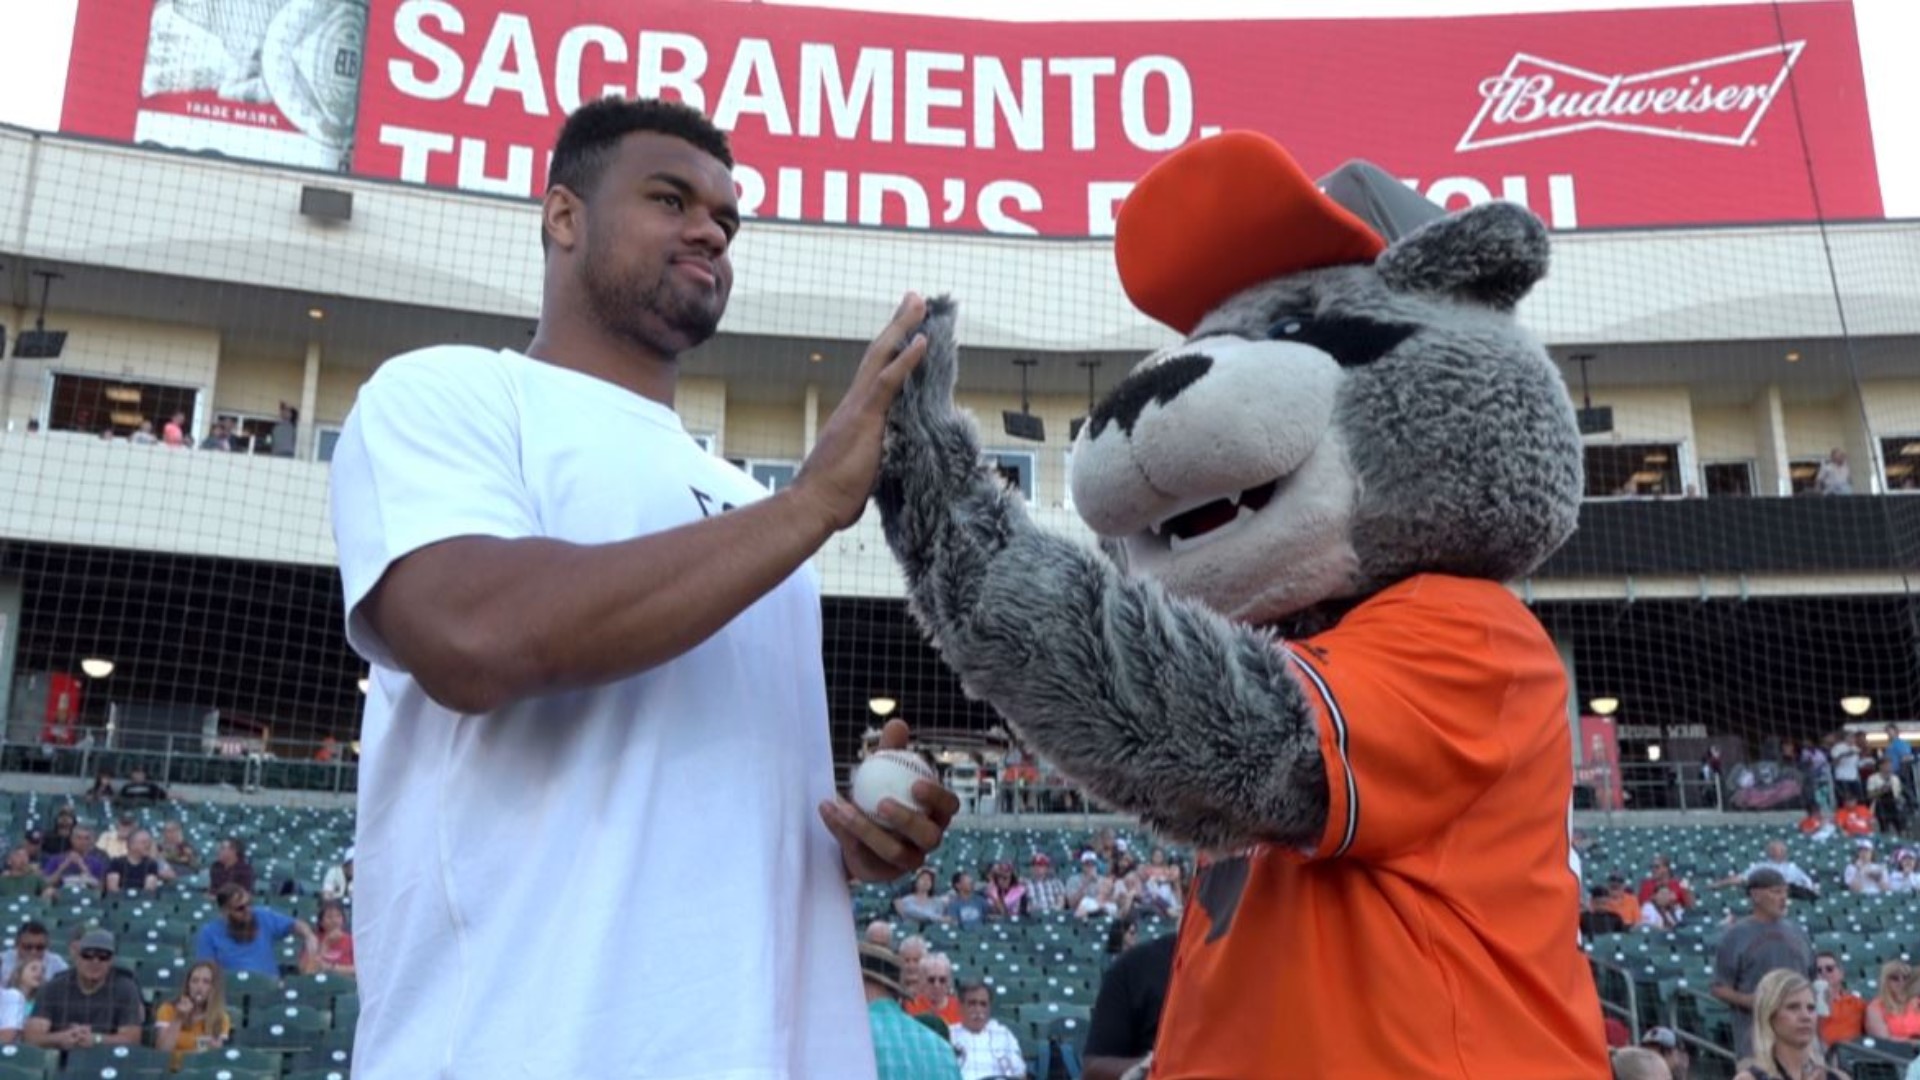 Sacramento native Arik Armstead, the defensive end of the San Francisco 49ers, was back in his hometown to toss the ceremonial first pitch at Raley Field before the River Cats game.